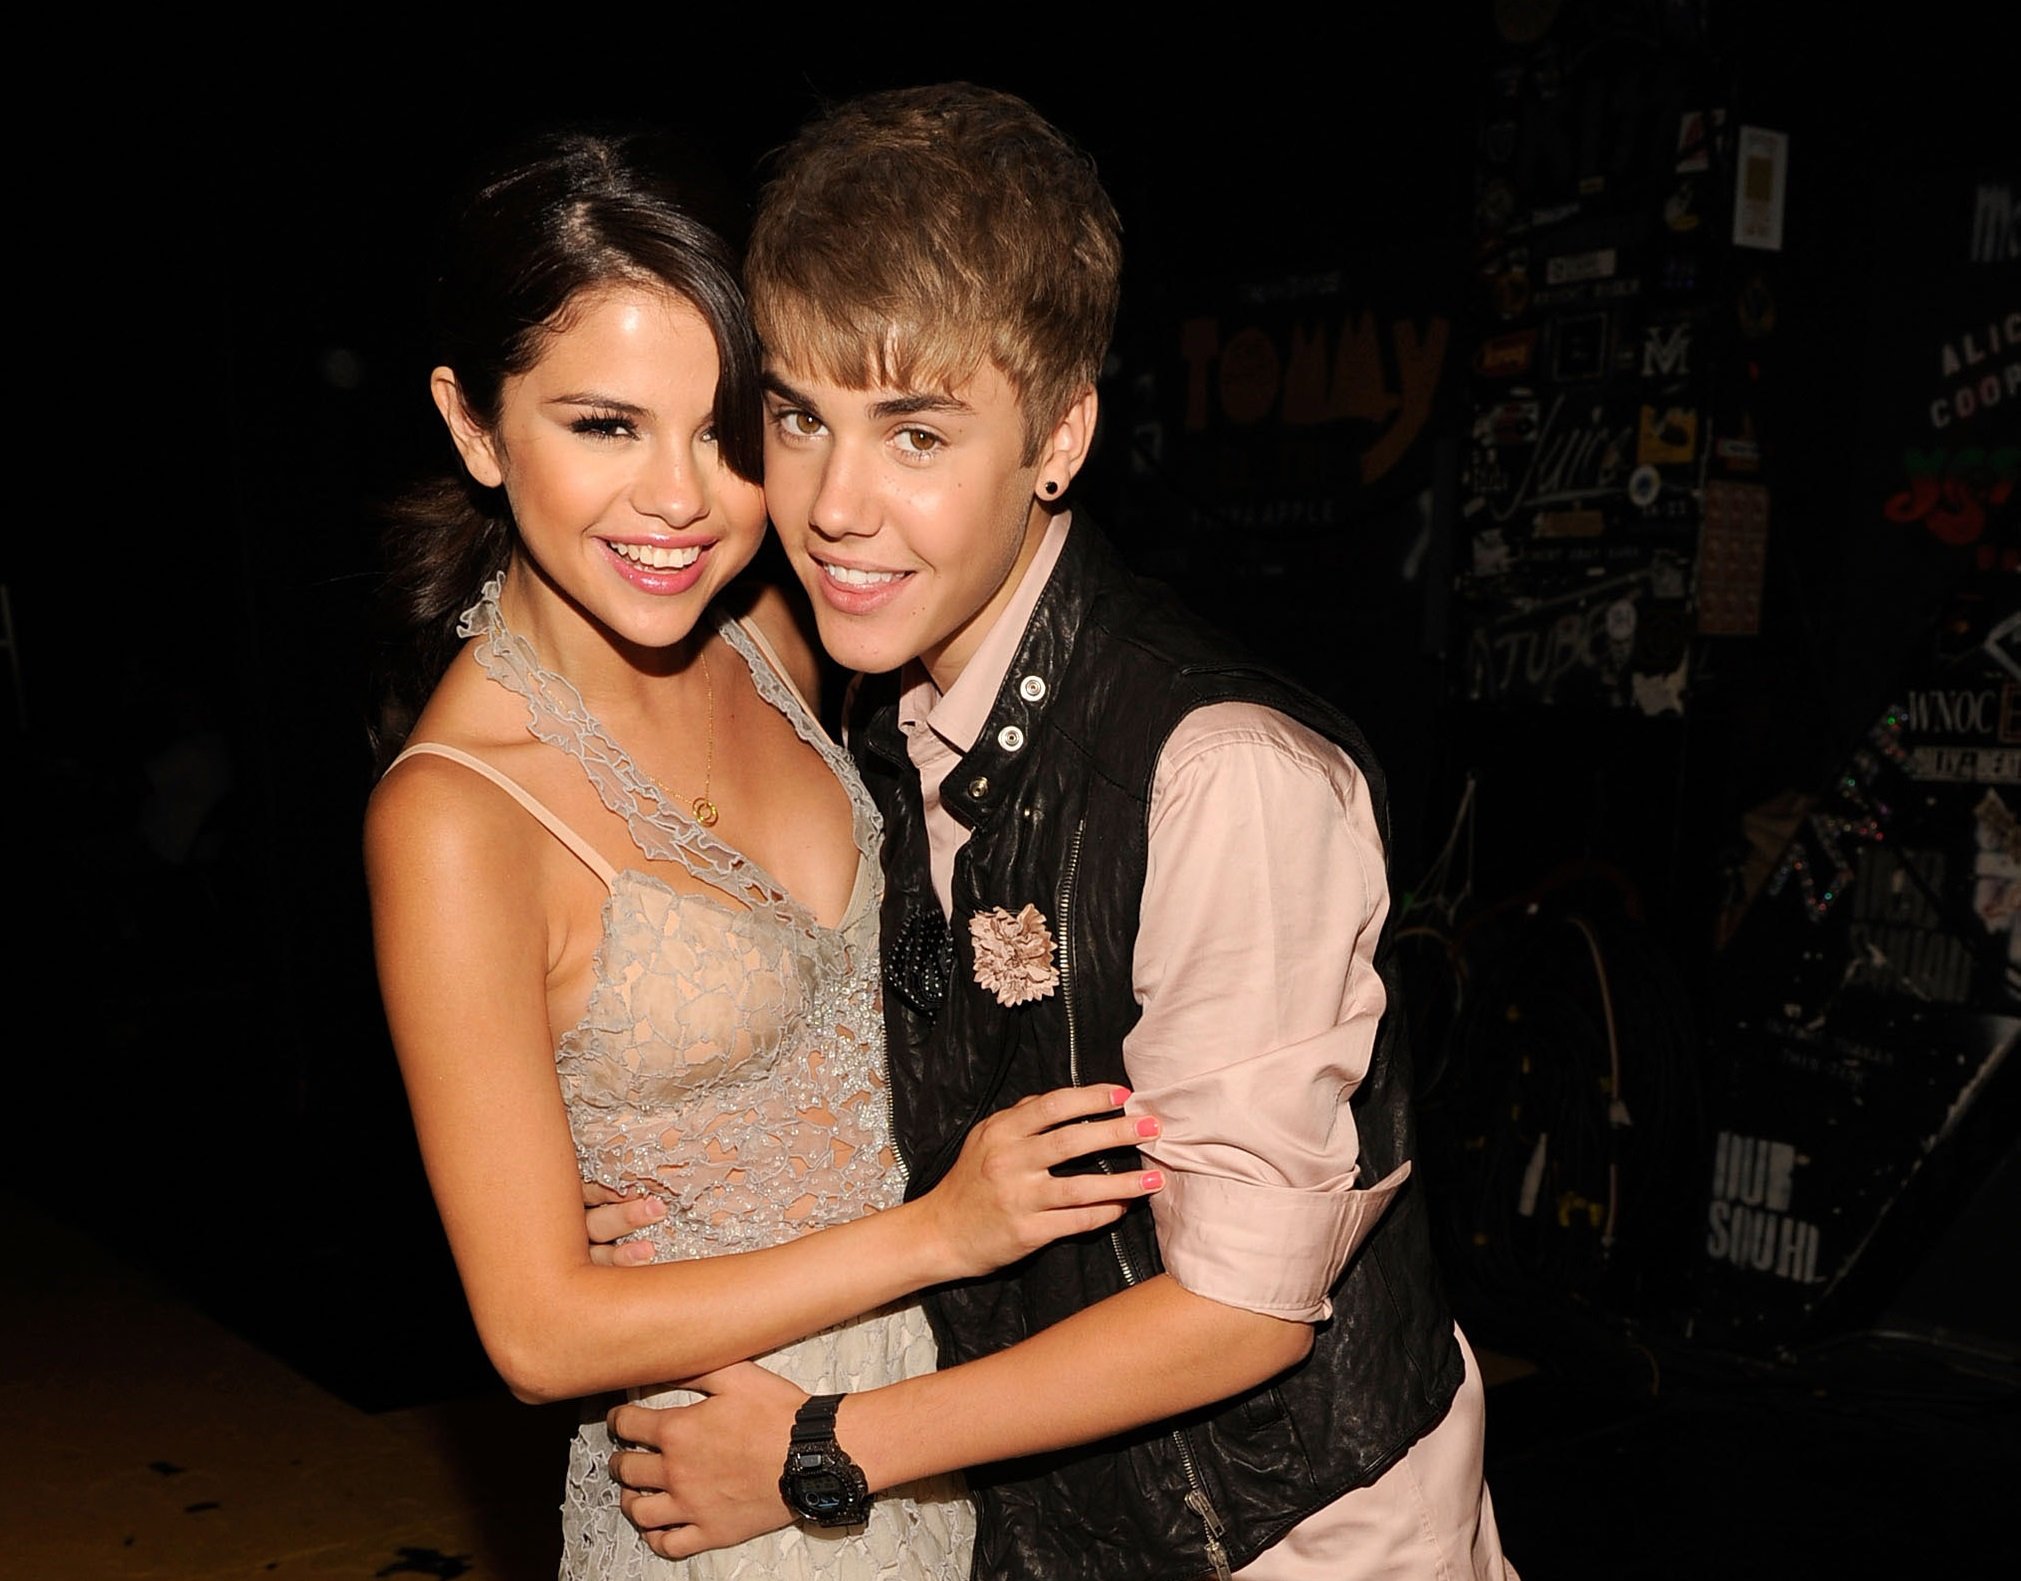 Selena Gomez and Justin Bieber attend the 2011 Teen Choice Awards on August 7, 2011 in Universal City, California.